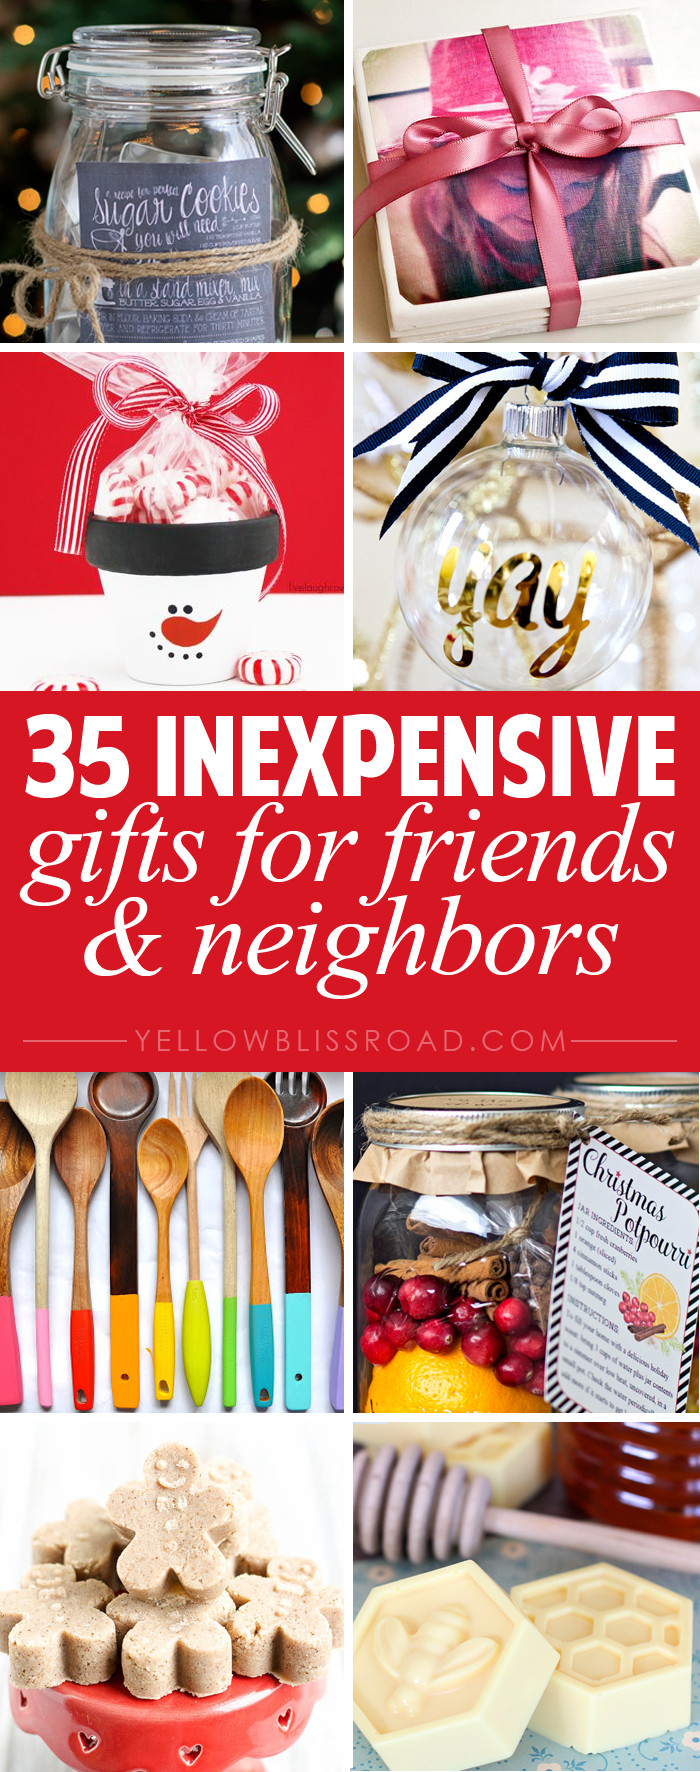 Friends Christmas Gift
 Bud Gifts Ideas for Friends and Neighbors Homemade